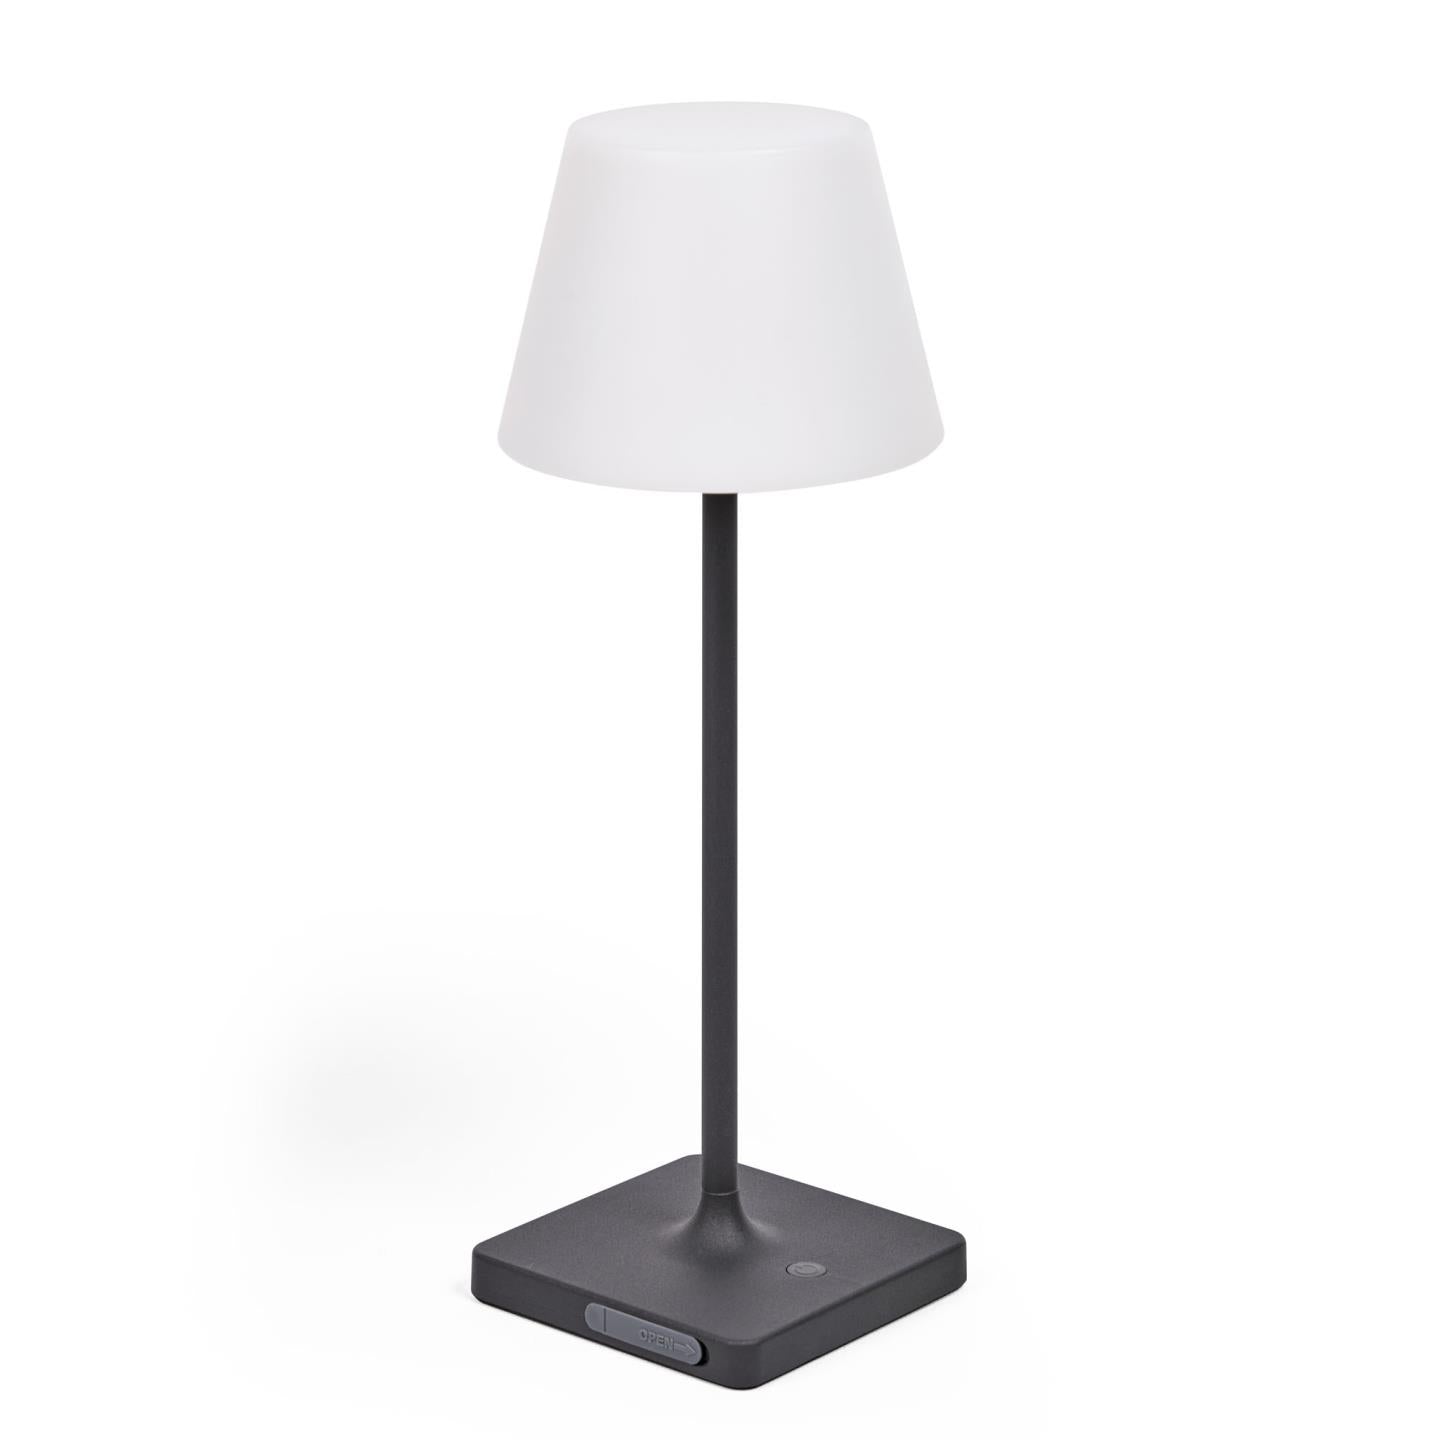 Outdoor Aluney table lamp in black finish